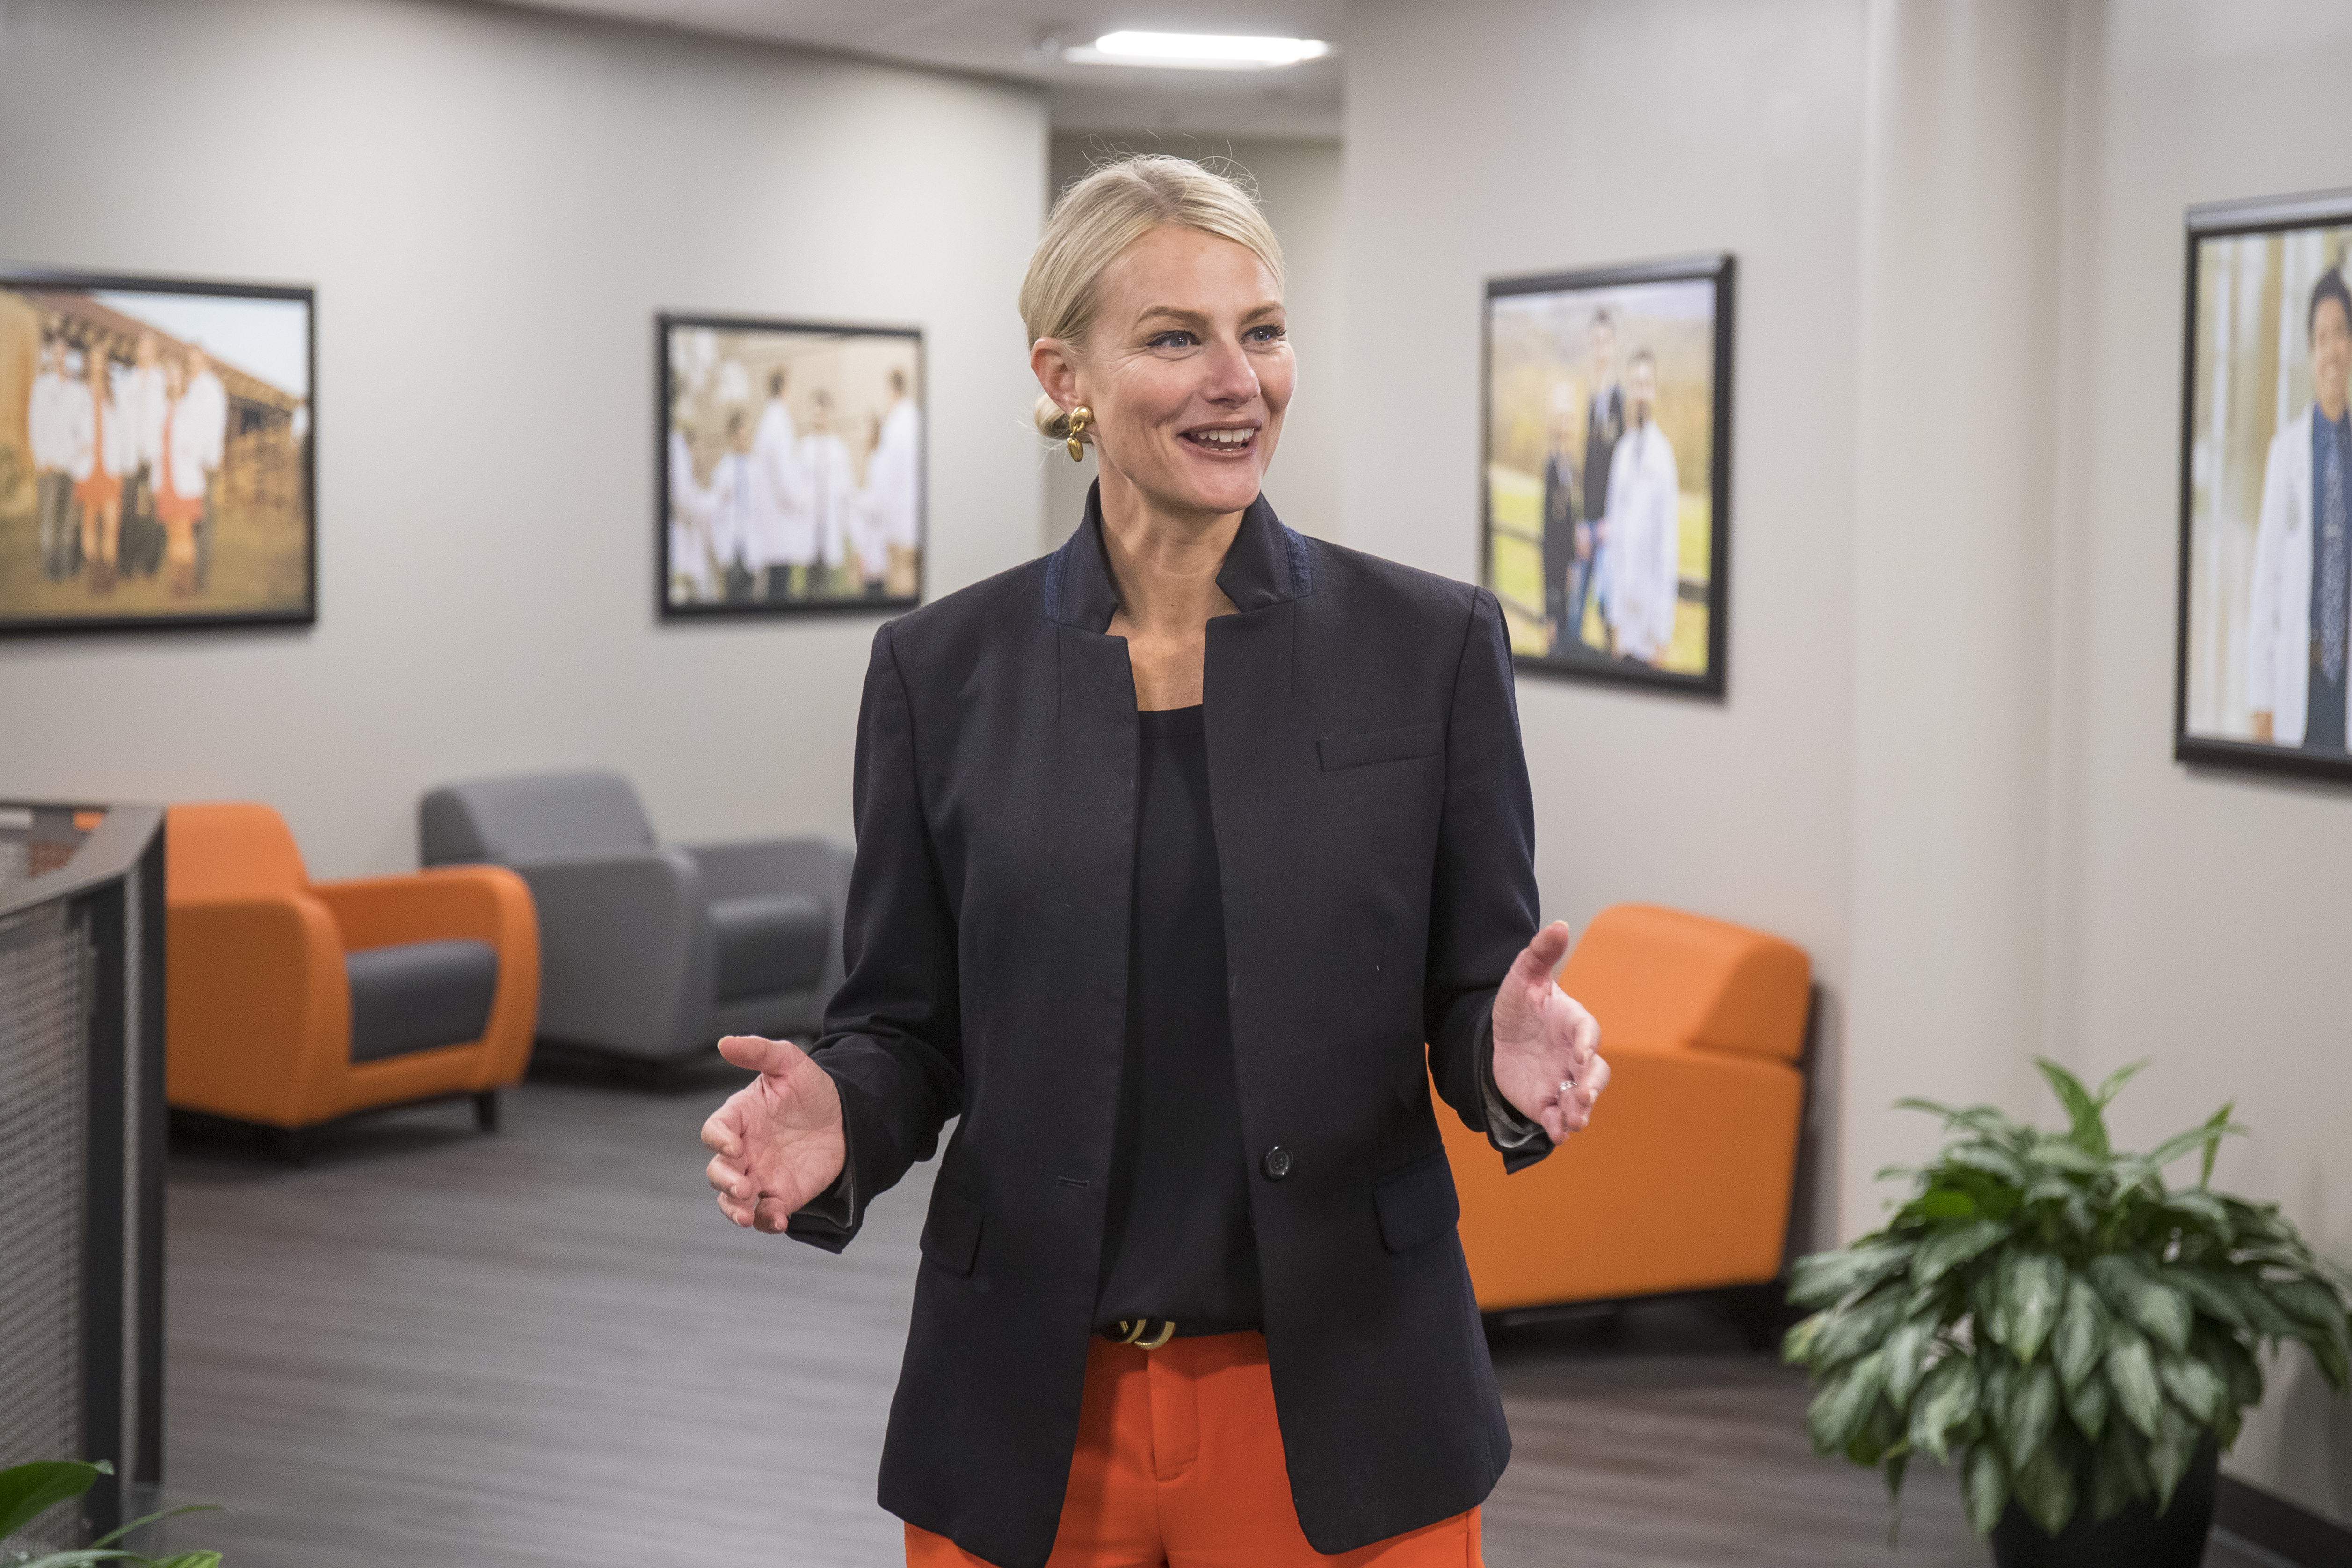 OSU/A&M Board of Regents Announces Selection of Dr. Kayse Shrum as 19th  President of Oklahoma State University | Business Wire